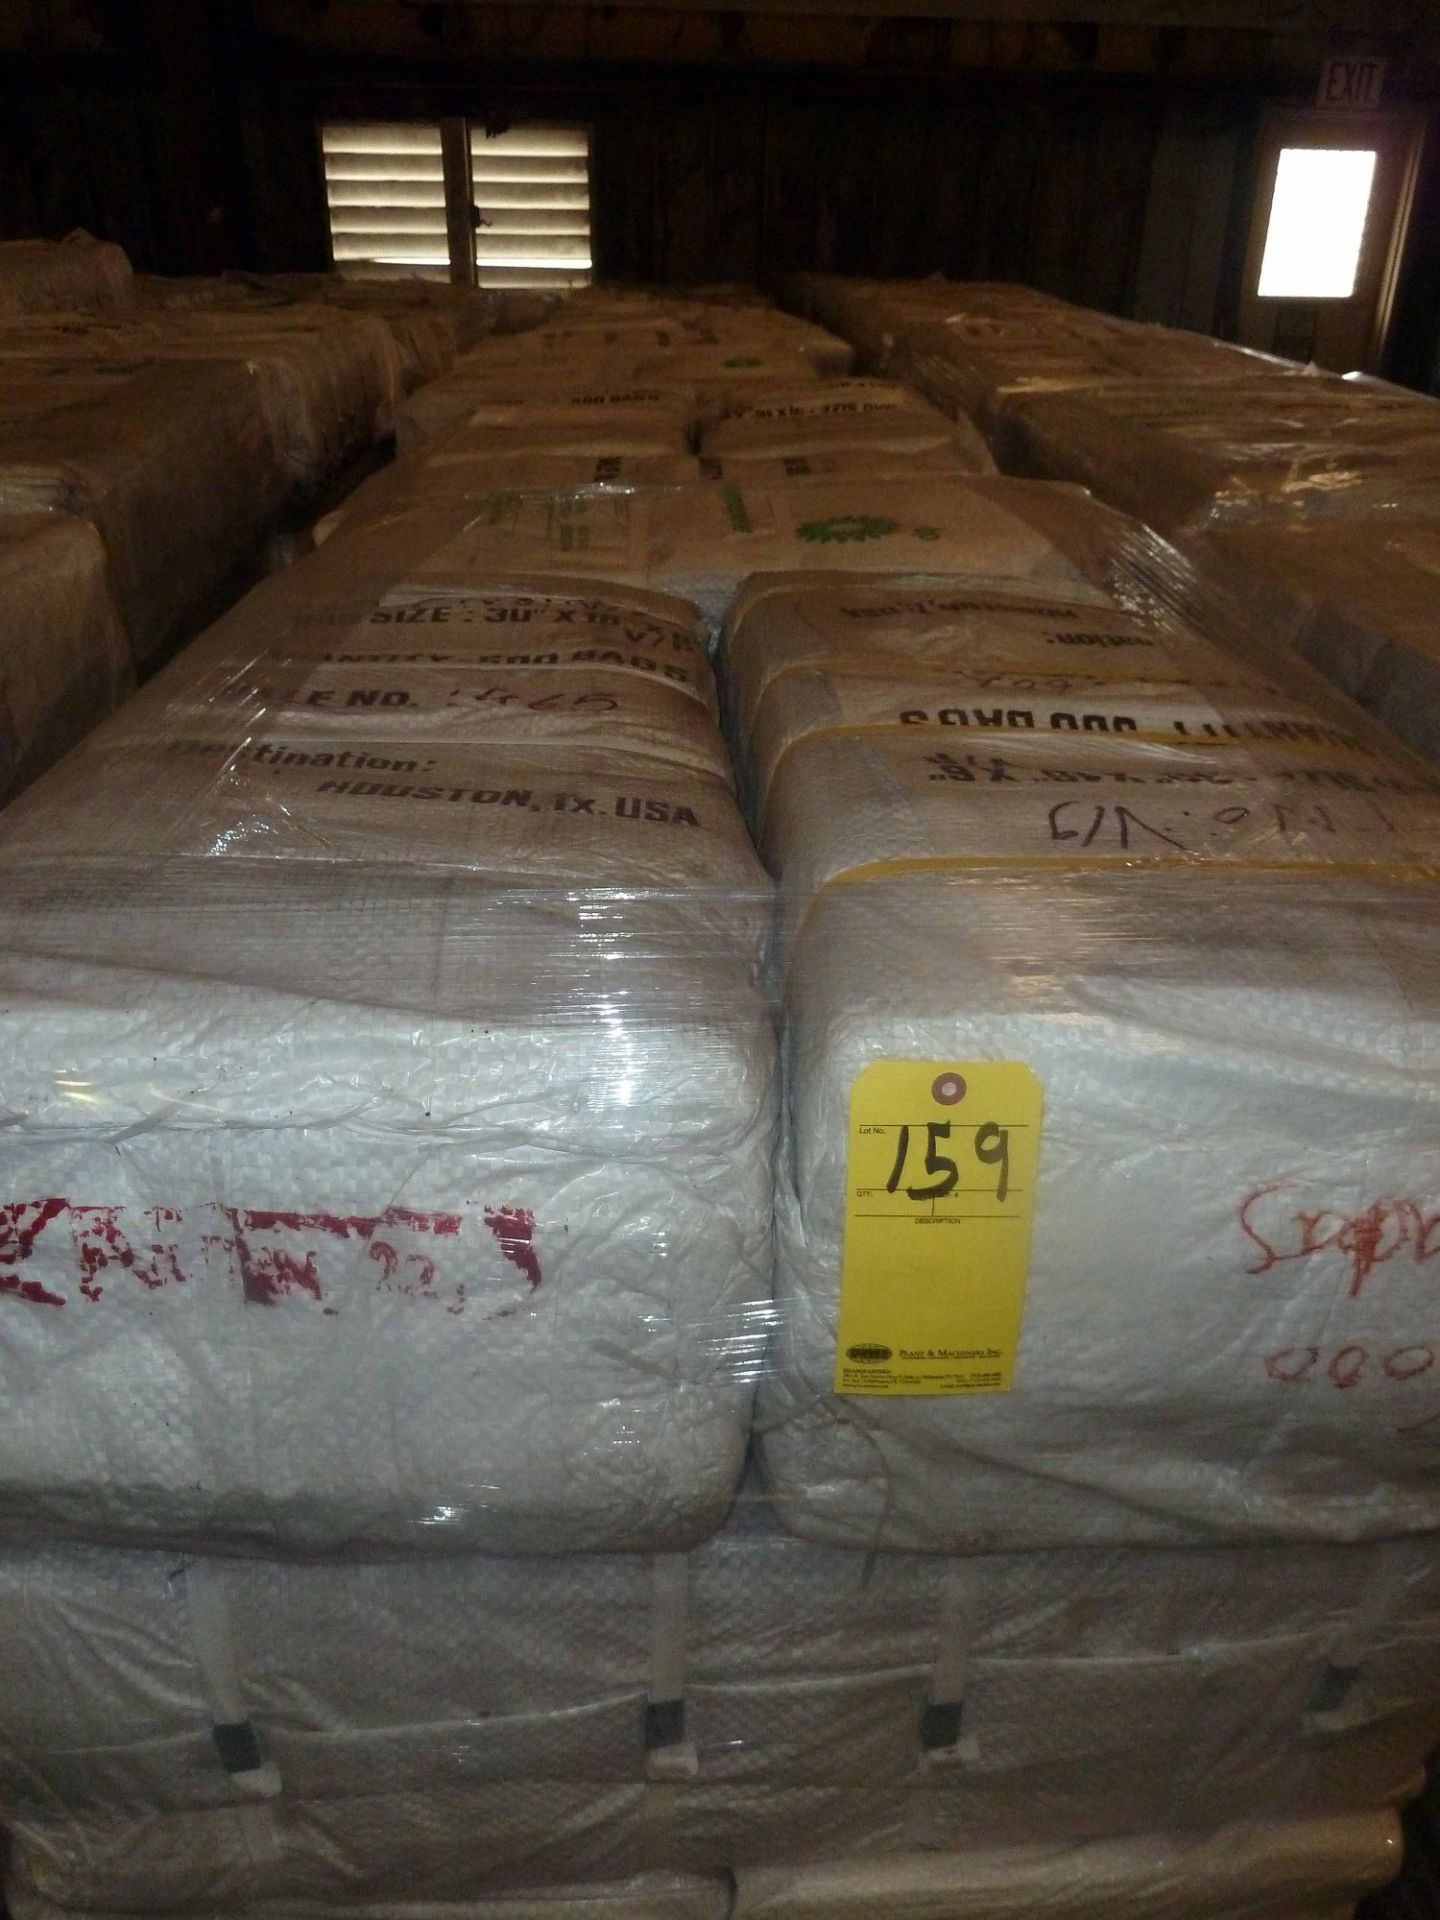 LOT OF PALLETIZED WOVEN BAGS, APPROX. 36,000 BAGS